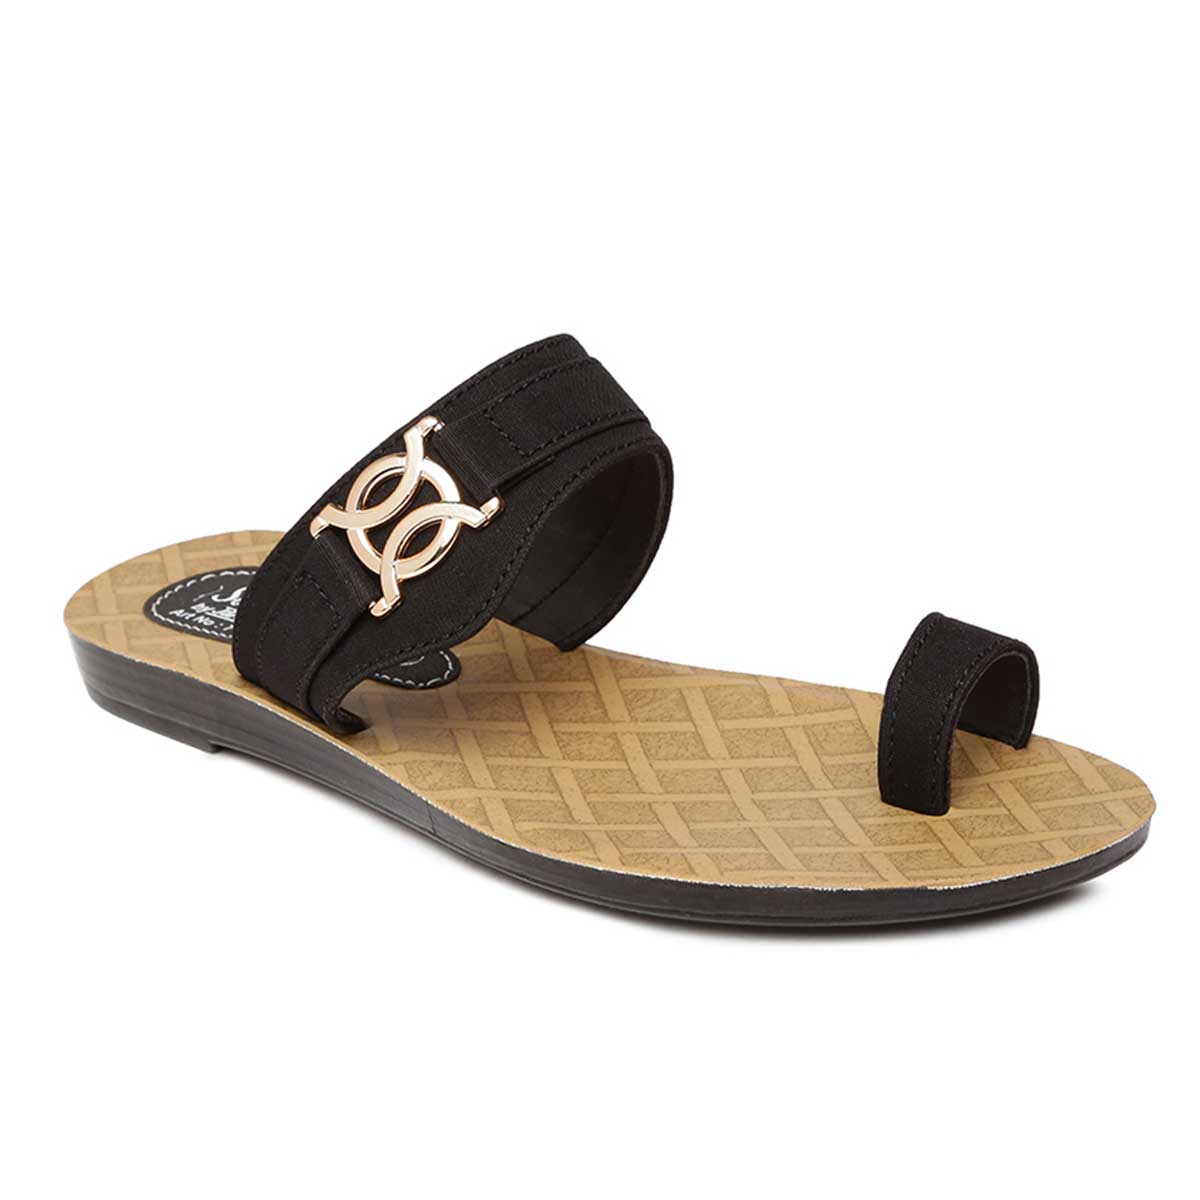 Buy Paragon-Solea Women's Black Slippers Online @ ₹239 from ShopClues